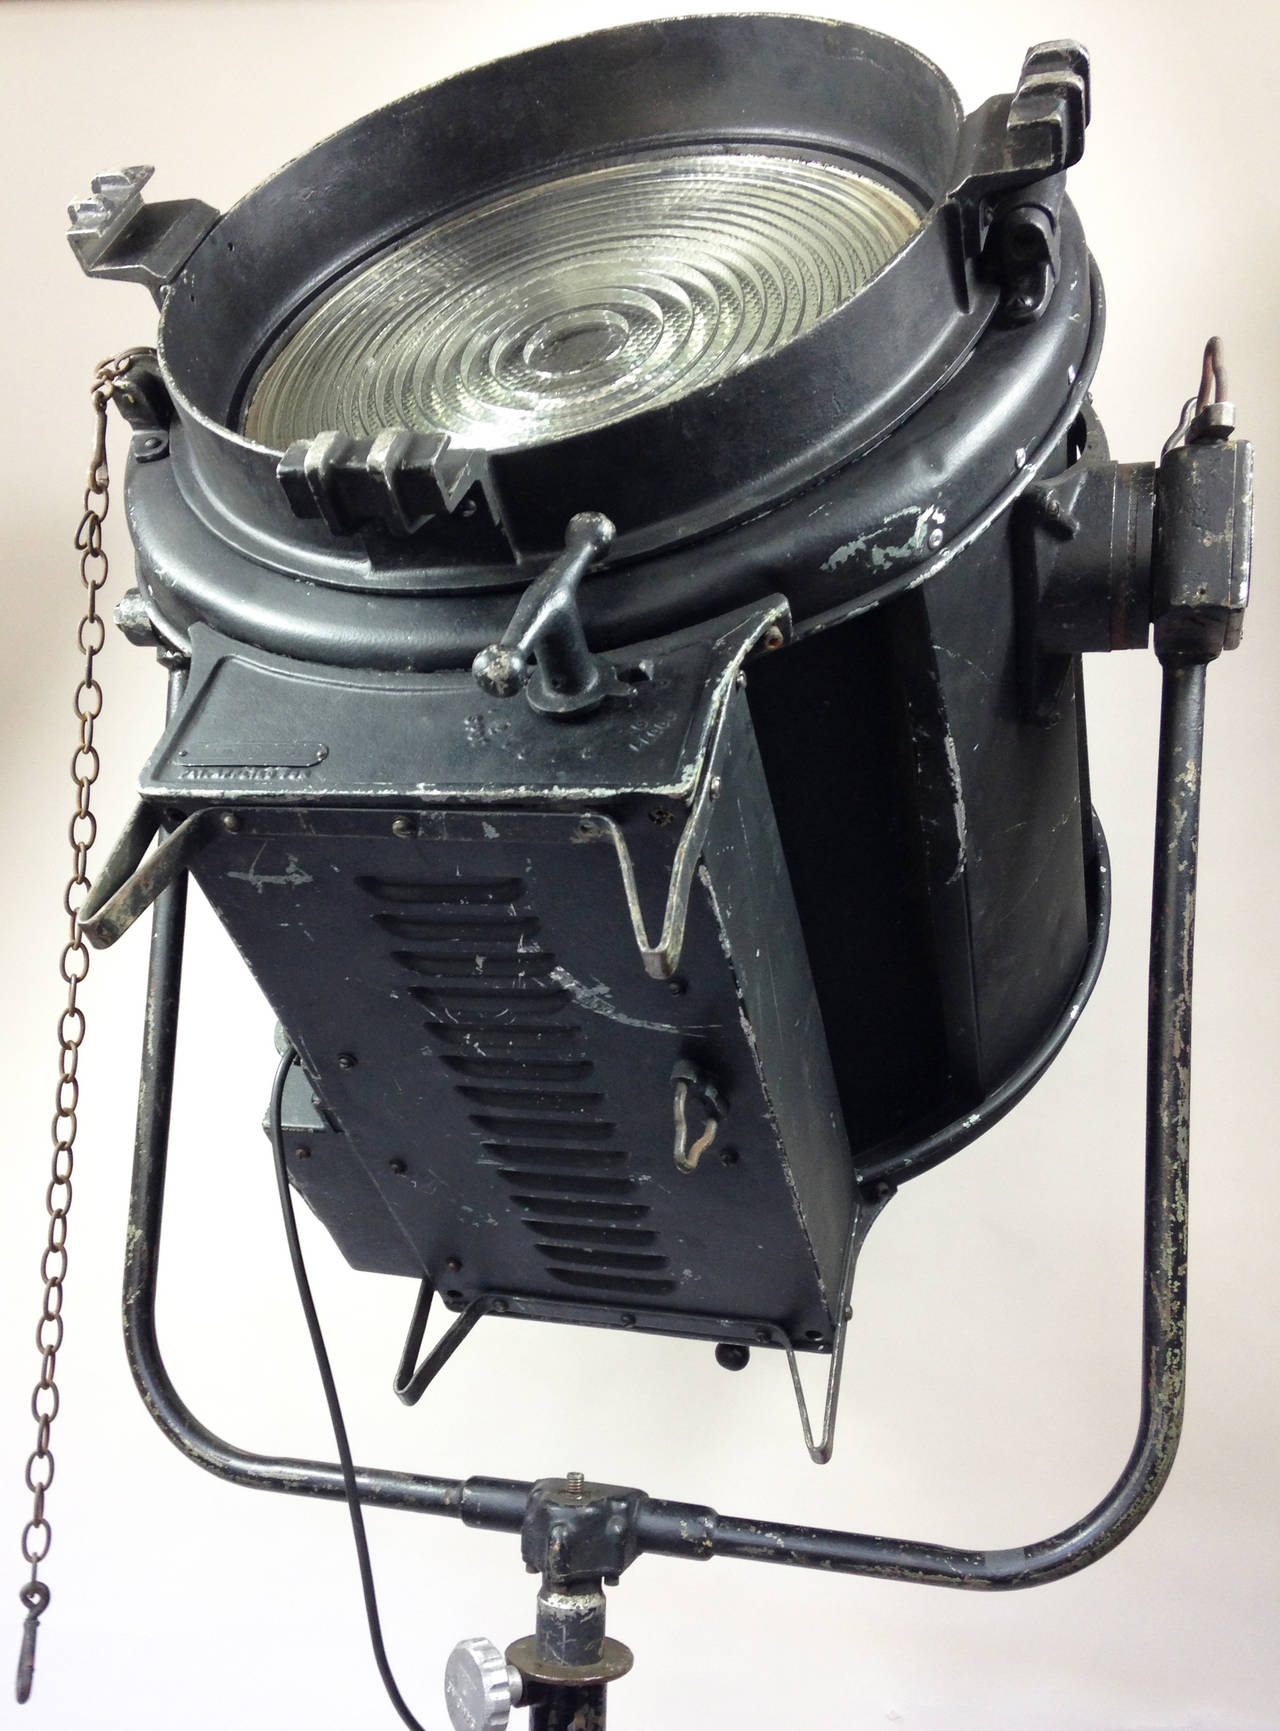 Great Britain (UK) Monumental Mid-20th Century English Theatre or Studio Light For Sale